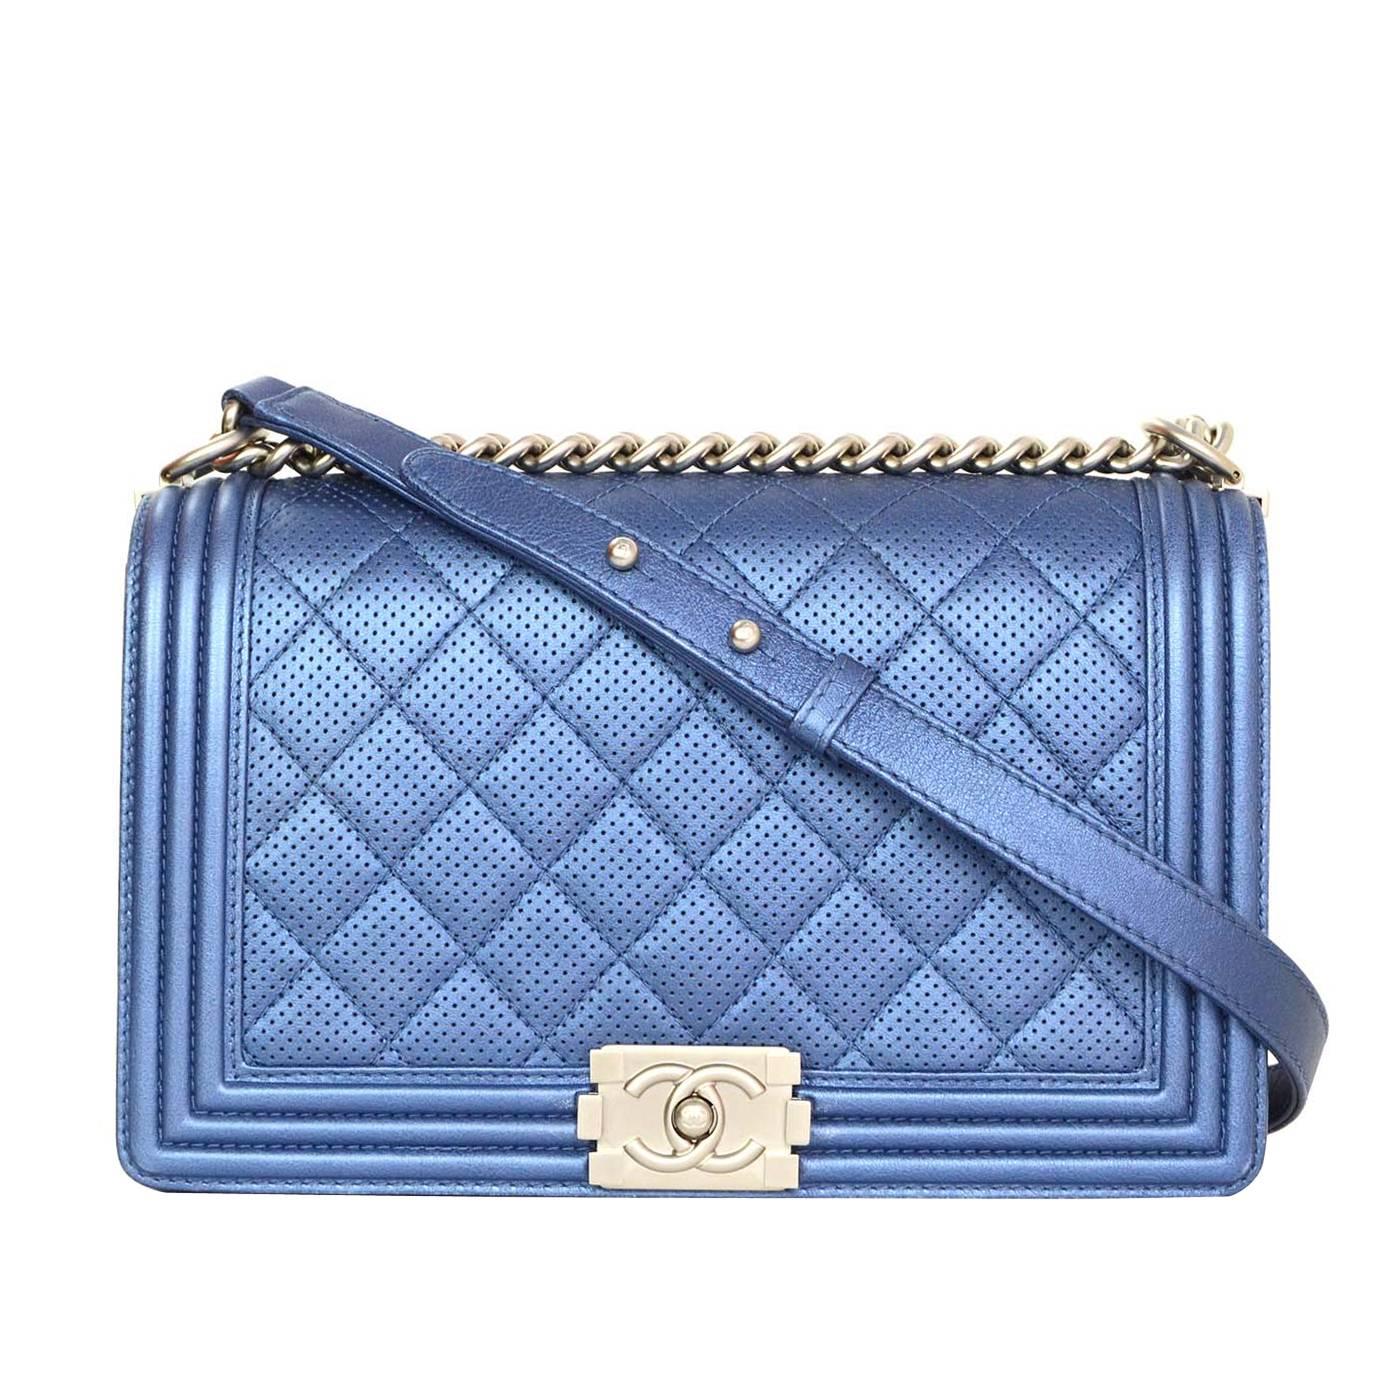 Chanel Metallic Blue Perforated Quilted New Medium Boy Bag SHW rt. $5, 200